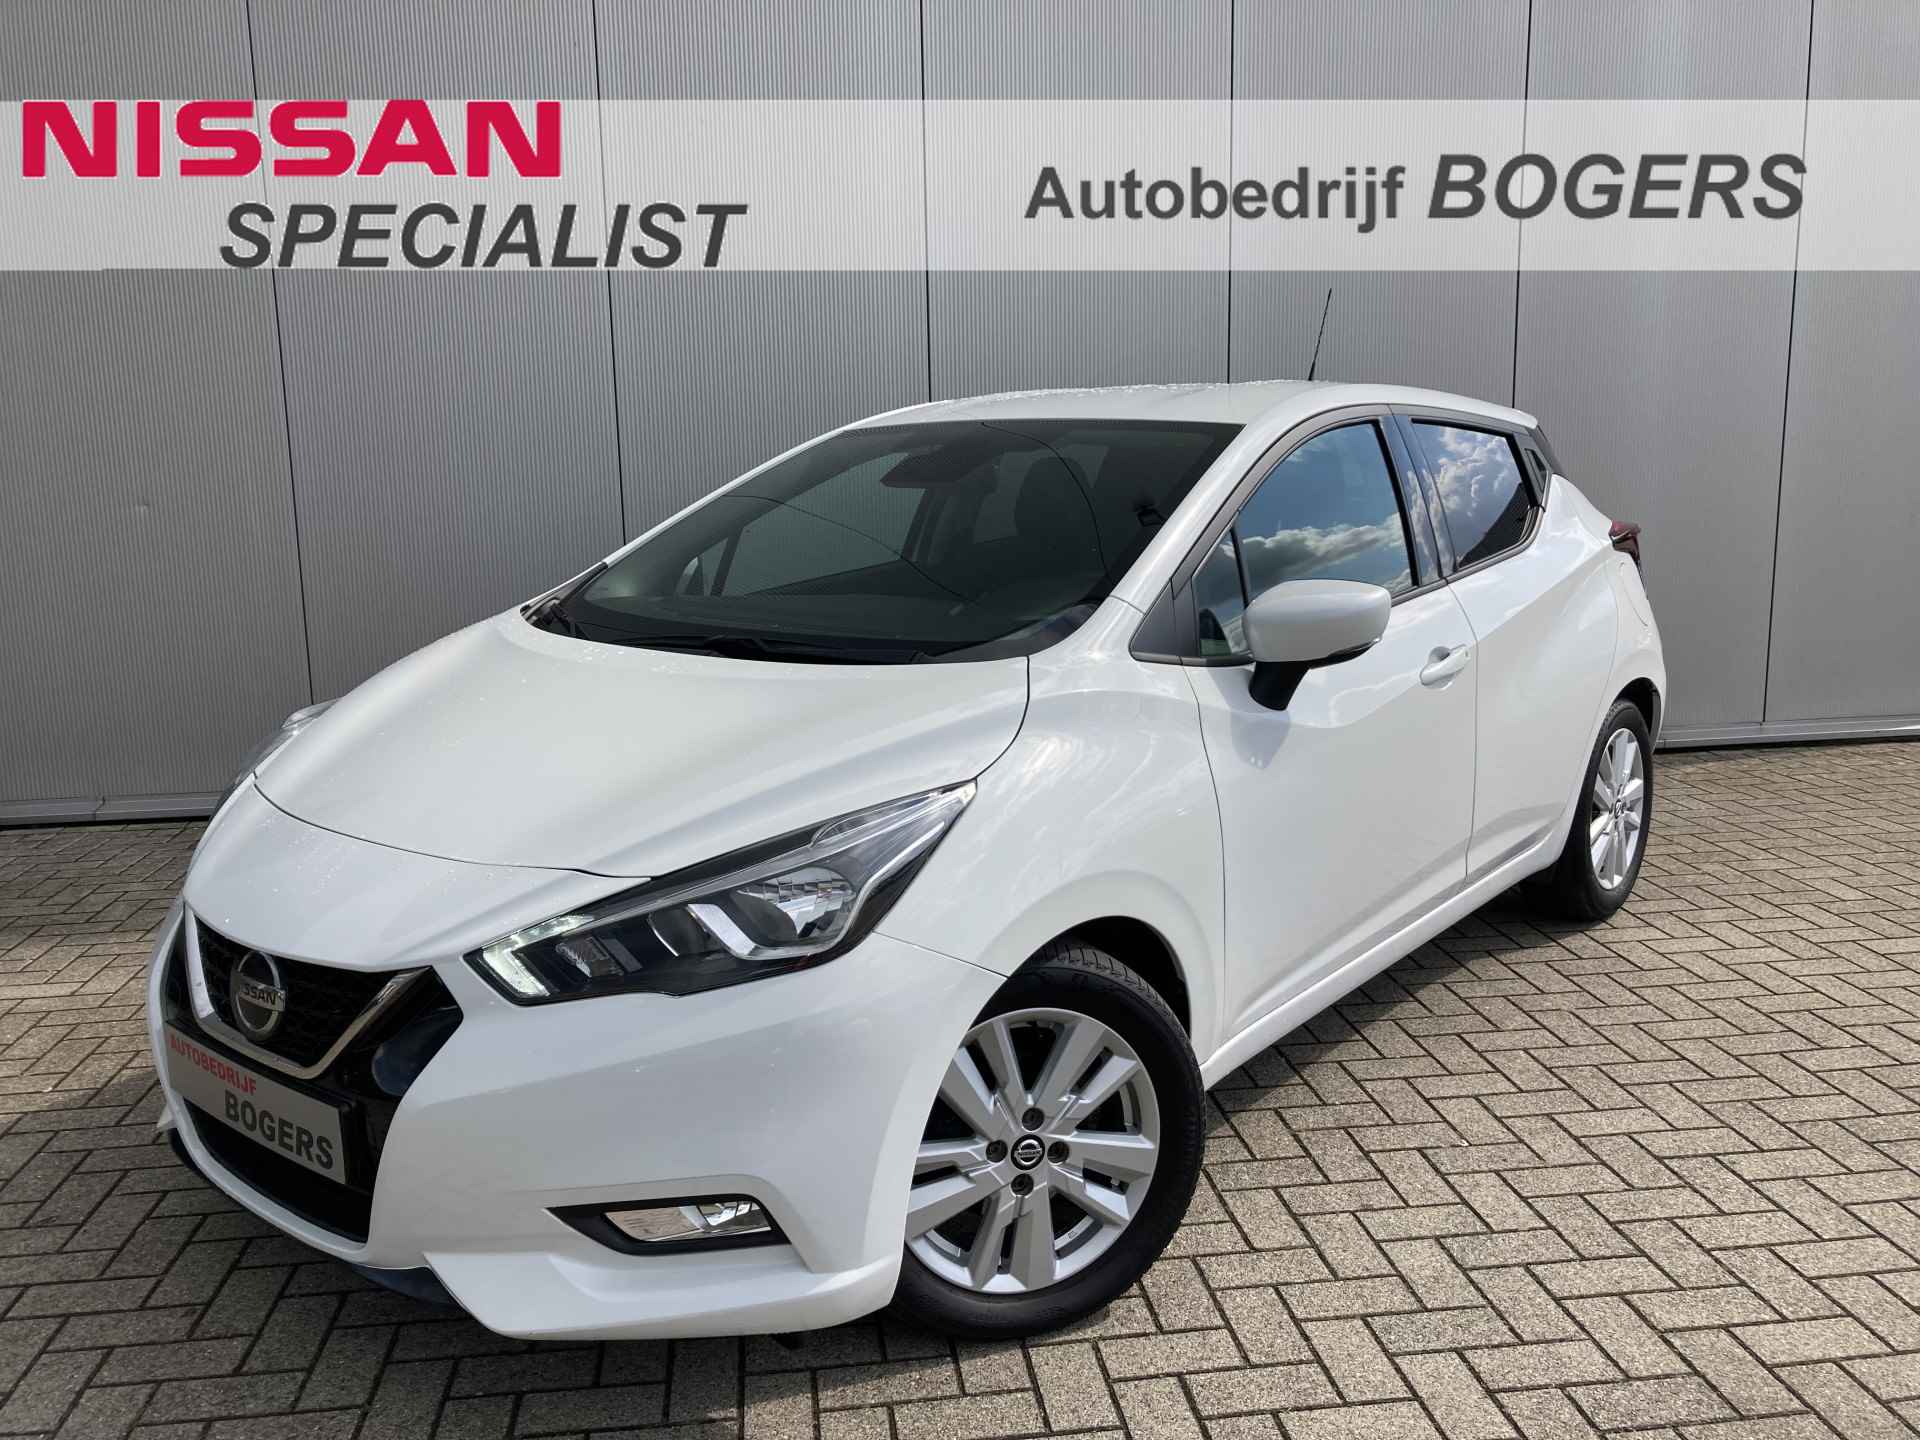 Nissan Micra 1.0 IG-T DCT Automaat N-Connecta Navigatie, Cruise Control, Airco, 16"Lm, Achteruitrijcamera - 1/20